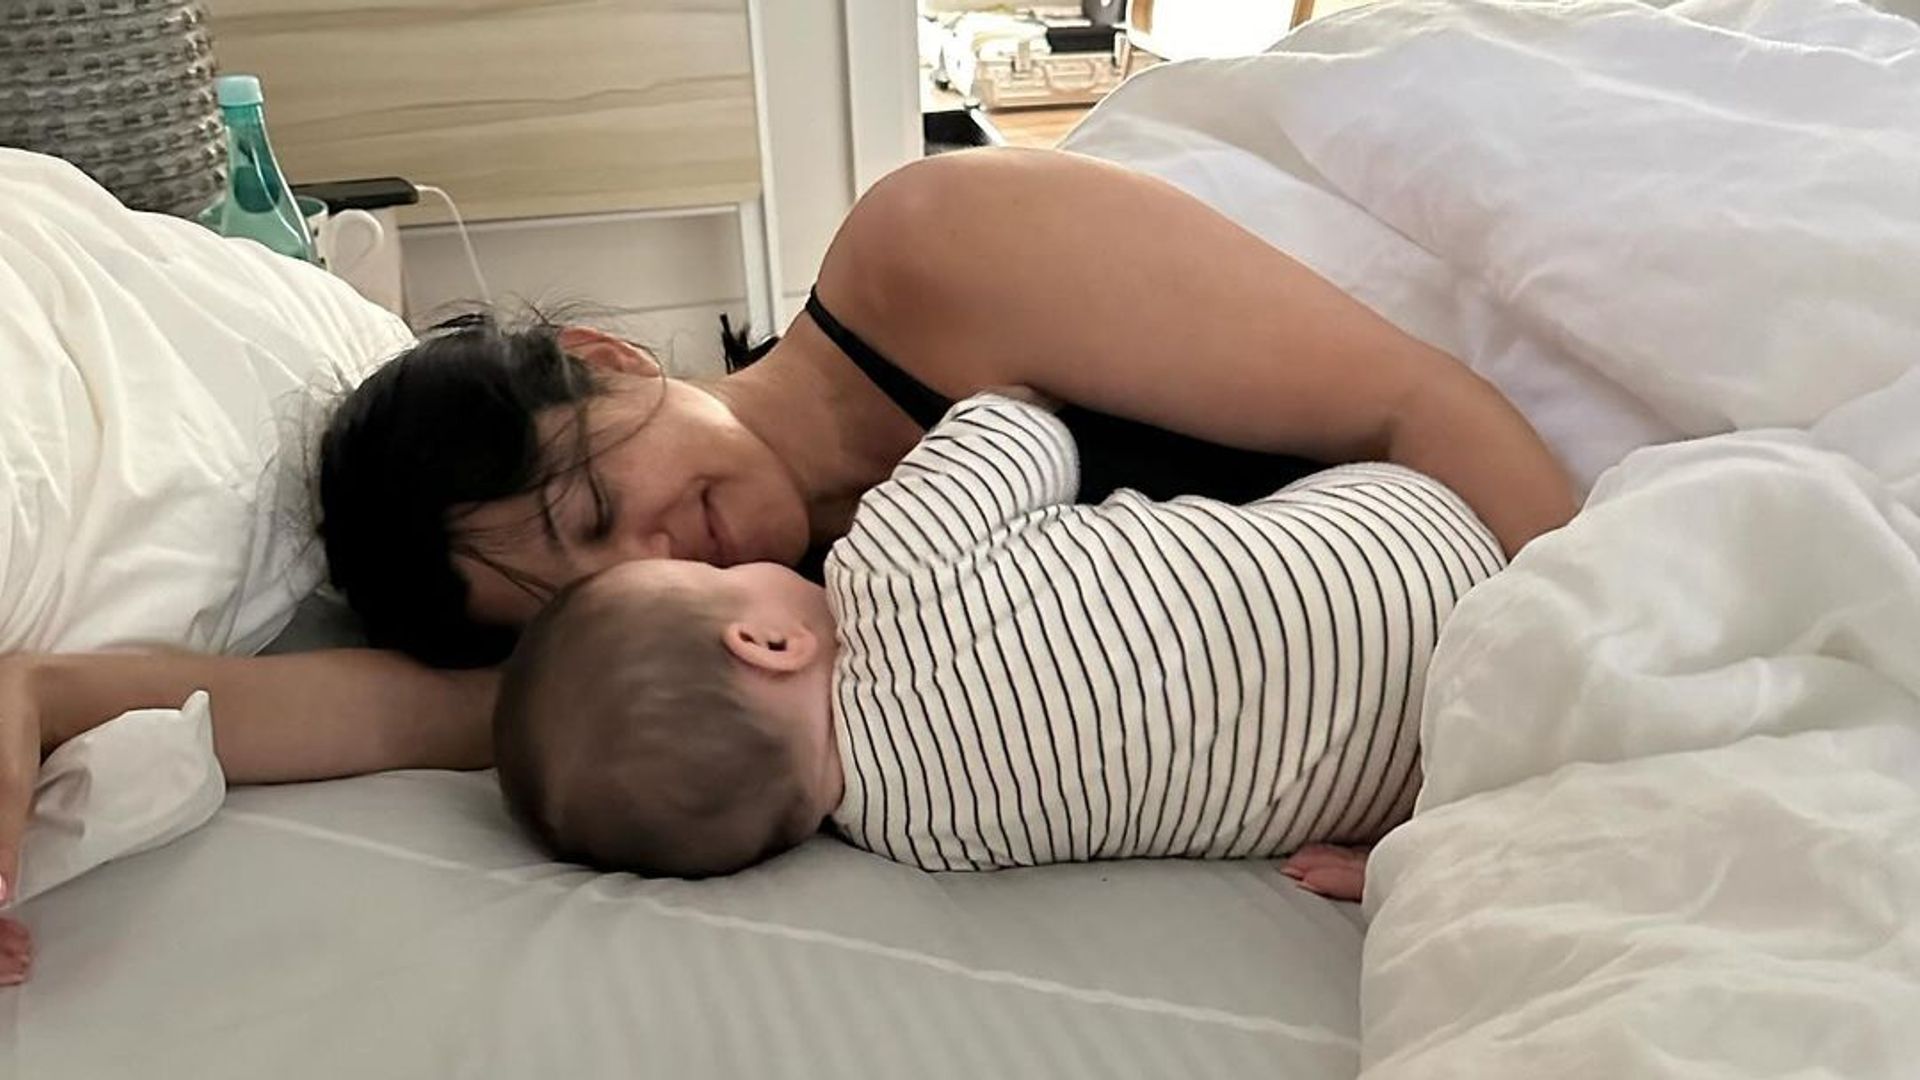 Kourtney Kardashian shares unconventional sleeping arrangement for Baby Rocky - 'it's my favorite thing in the world'